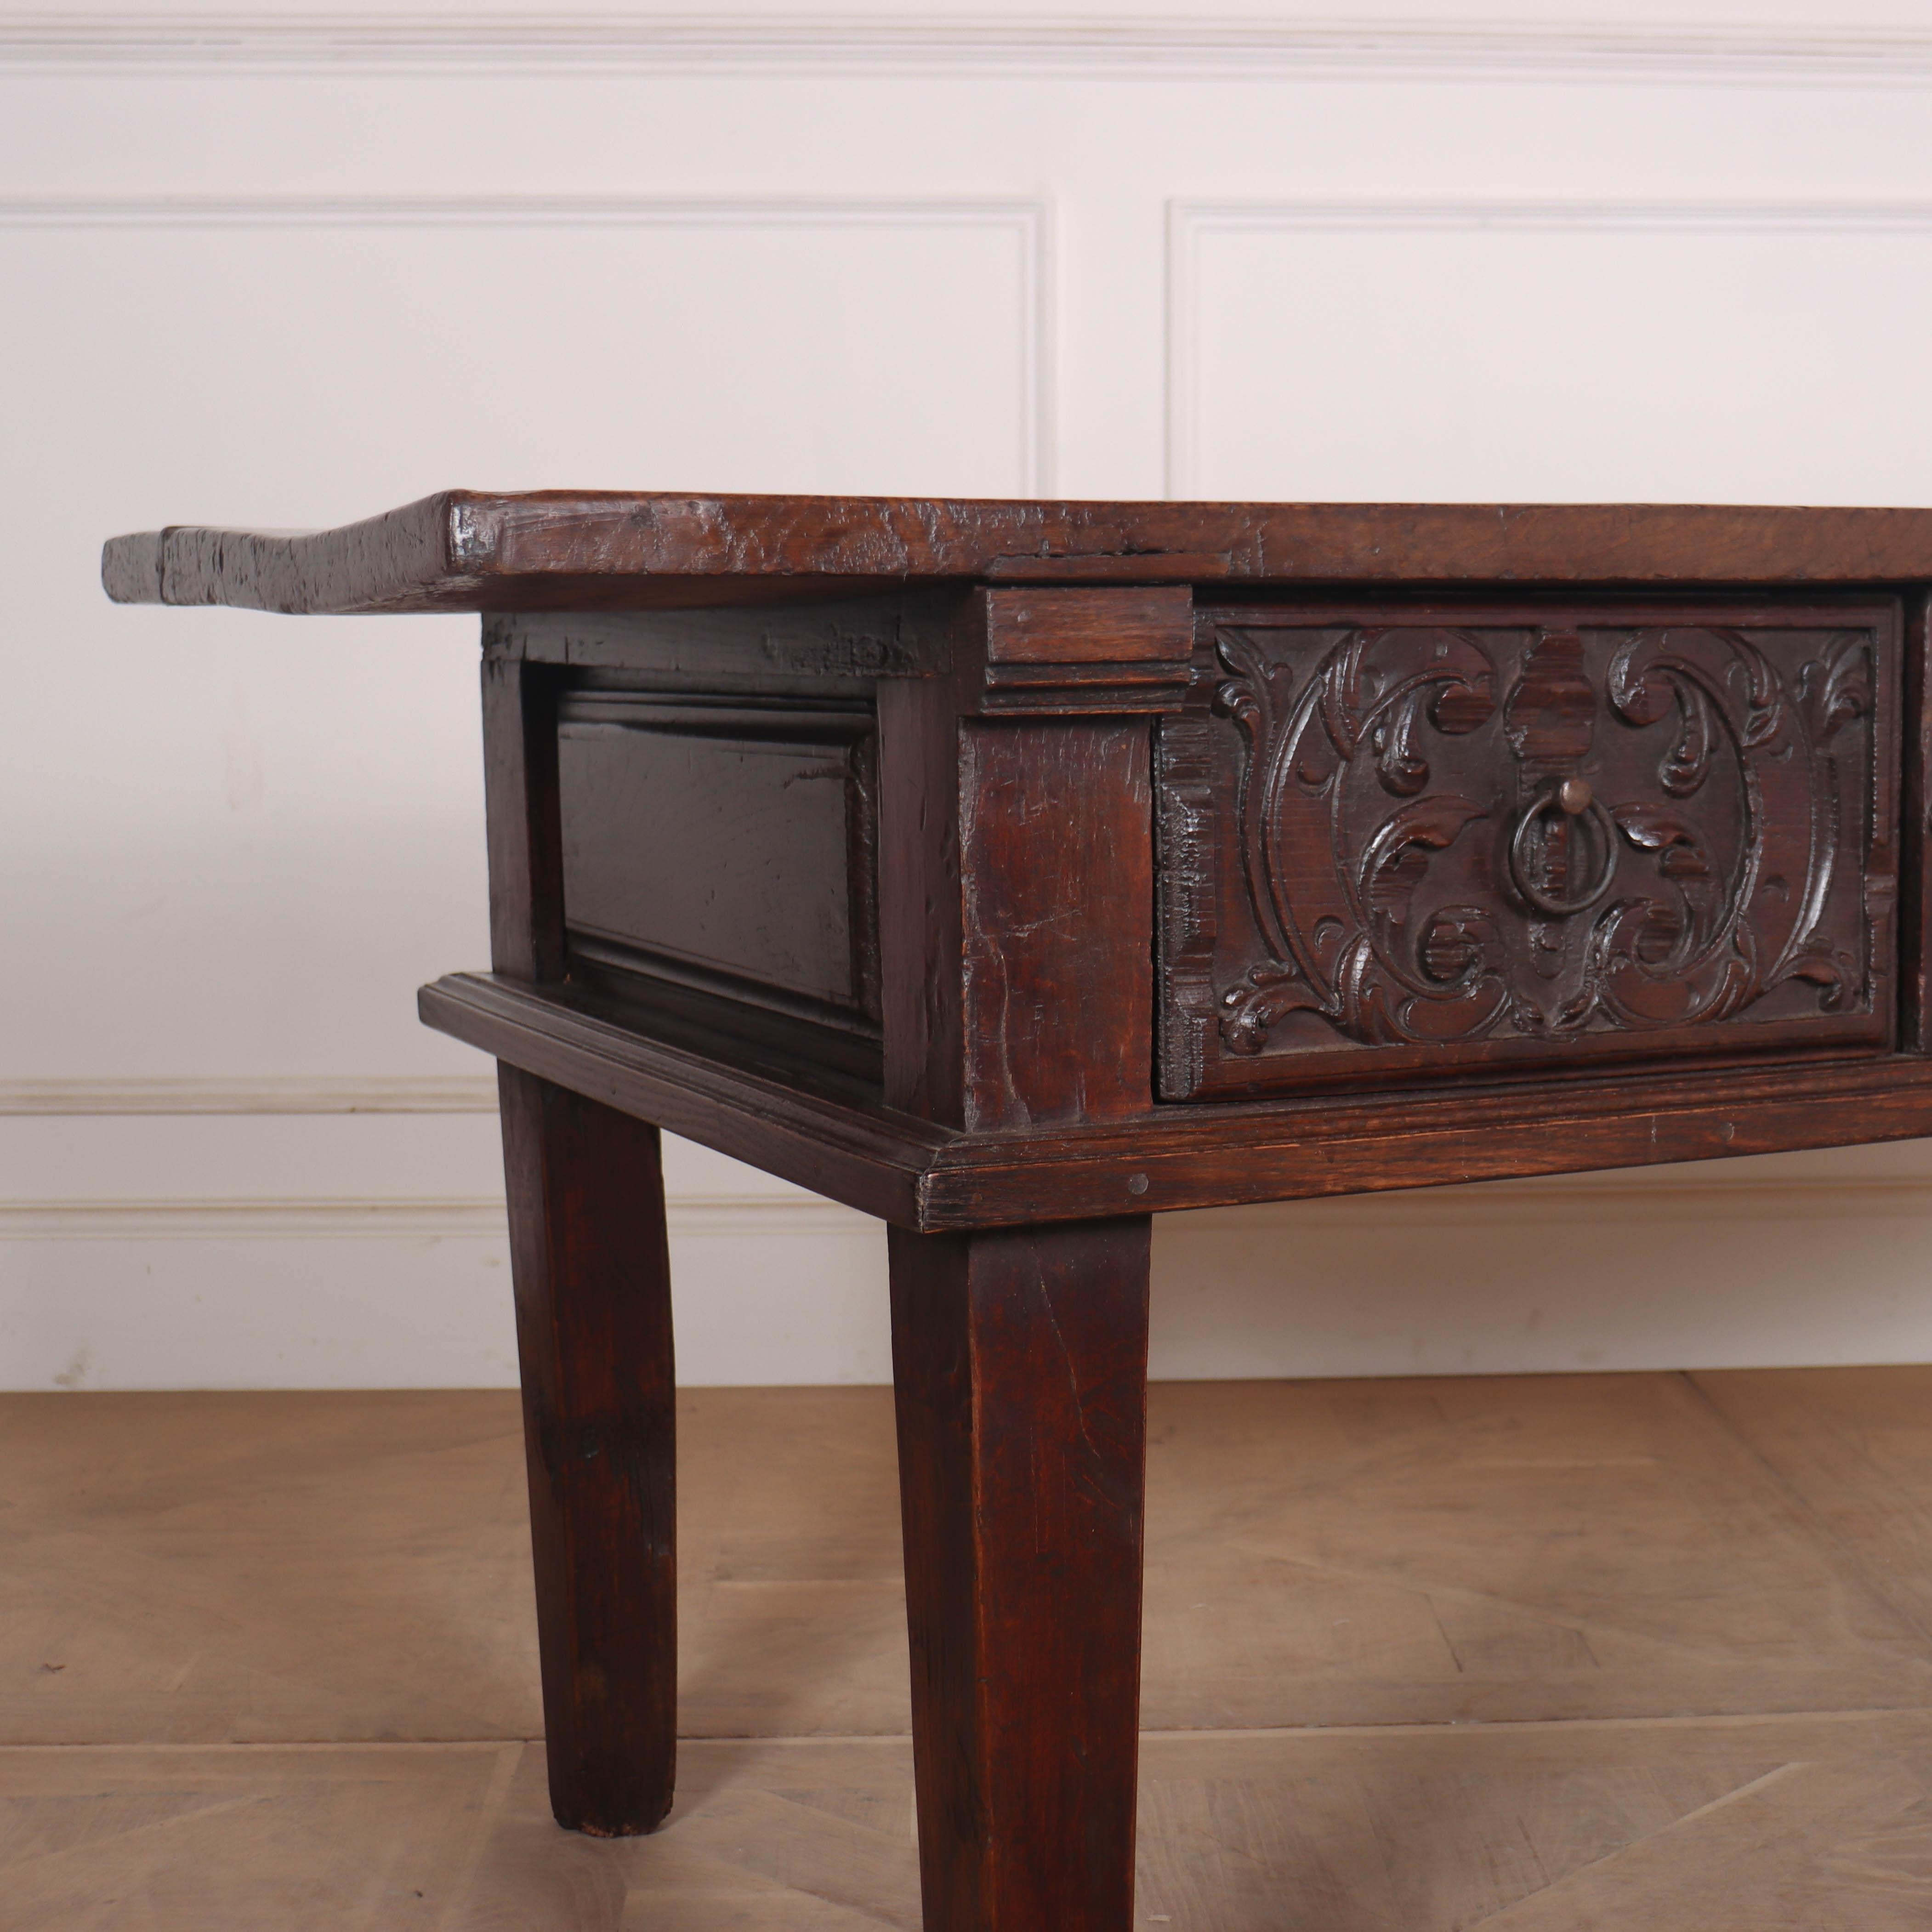 Good 18th century Spanish carved oak three drawer console table. Great colour. 1760.

Reference: 7832

Dimensions
75.5 inches (192 cms) Wide
29 inches (74 cms) Deep
29 inches (74 cms) High